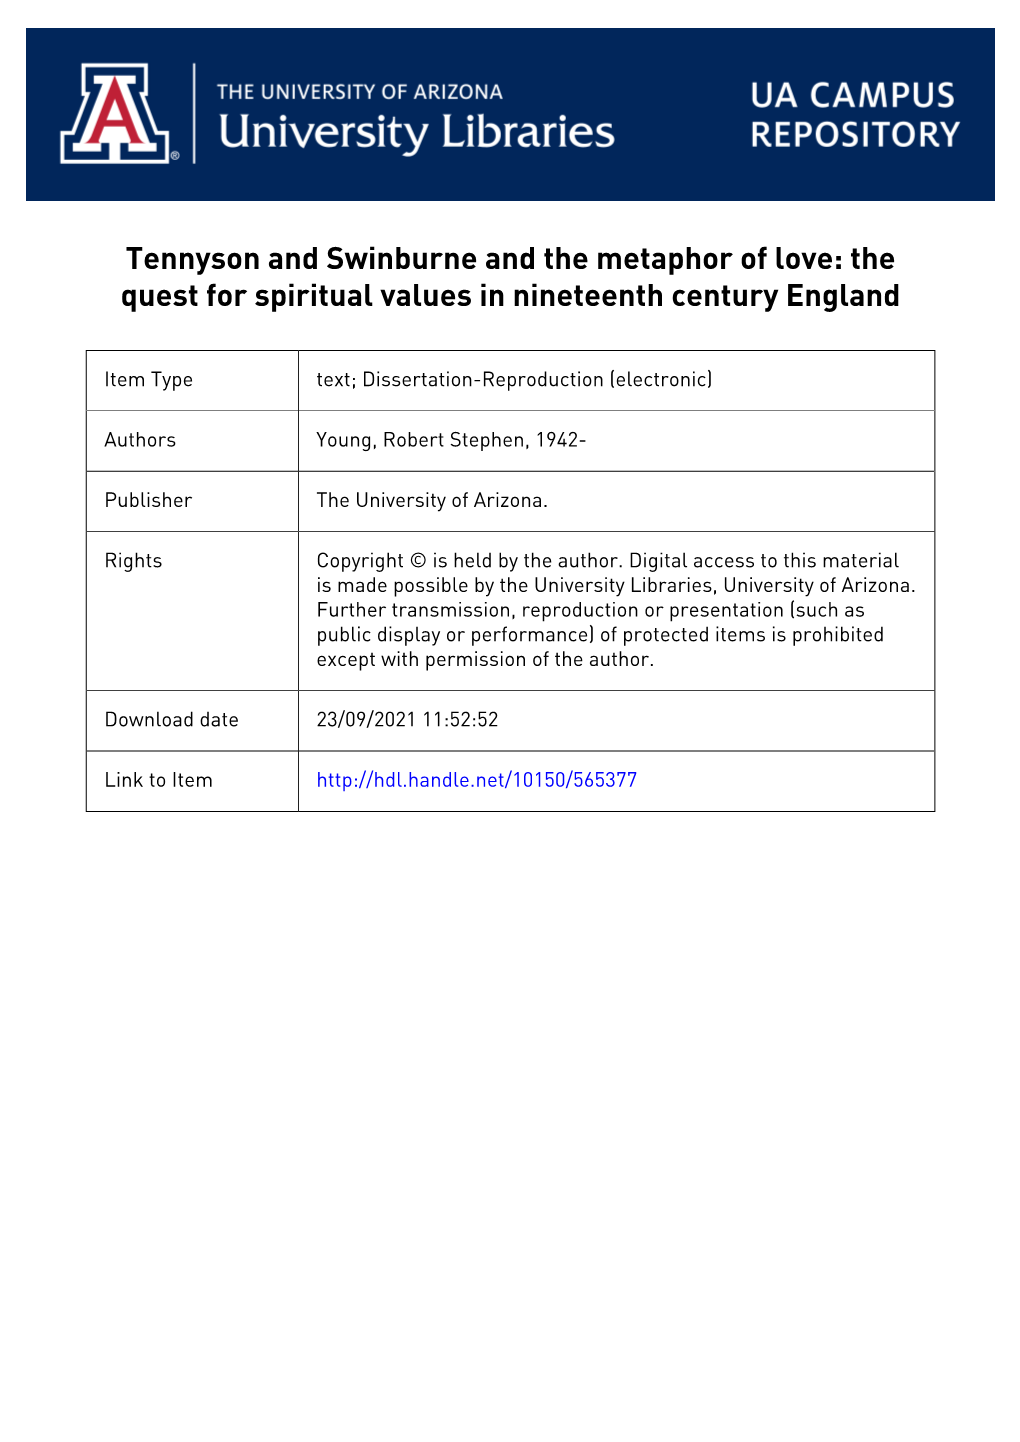 Tennyson and Swinburne and the Metaphor of Love: the Quest for Spiritual Values in Nineteenth Century England